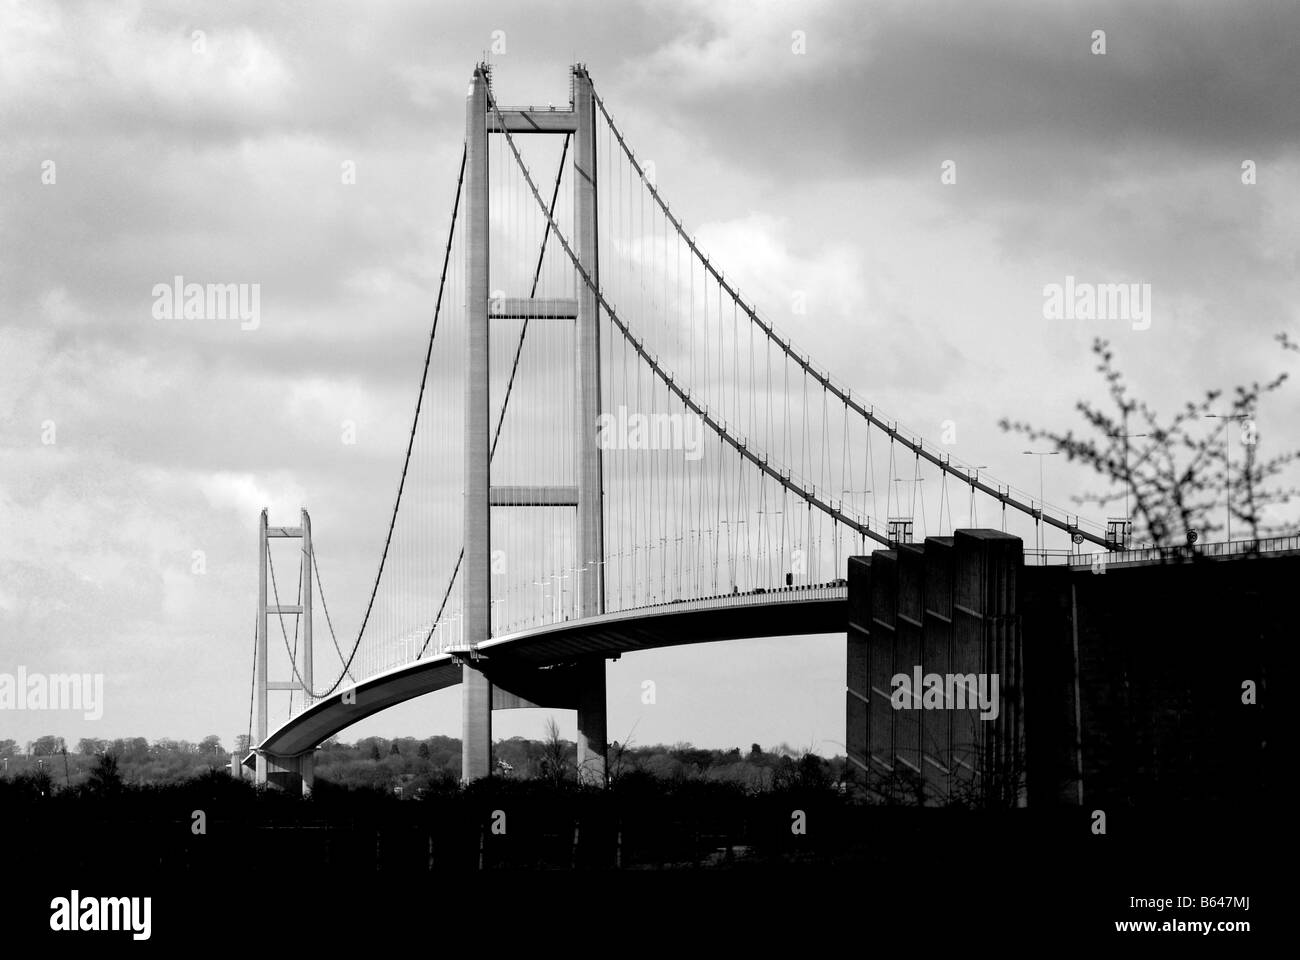 The Humber Bridge connecting East Yorkshire and North Lincolnshire between Hessle and Barton. Stock Photo